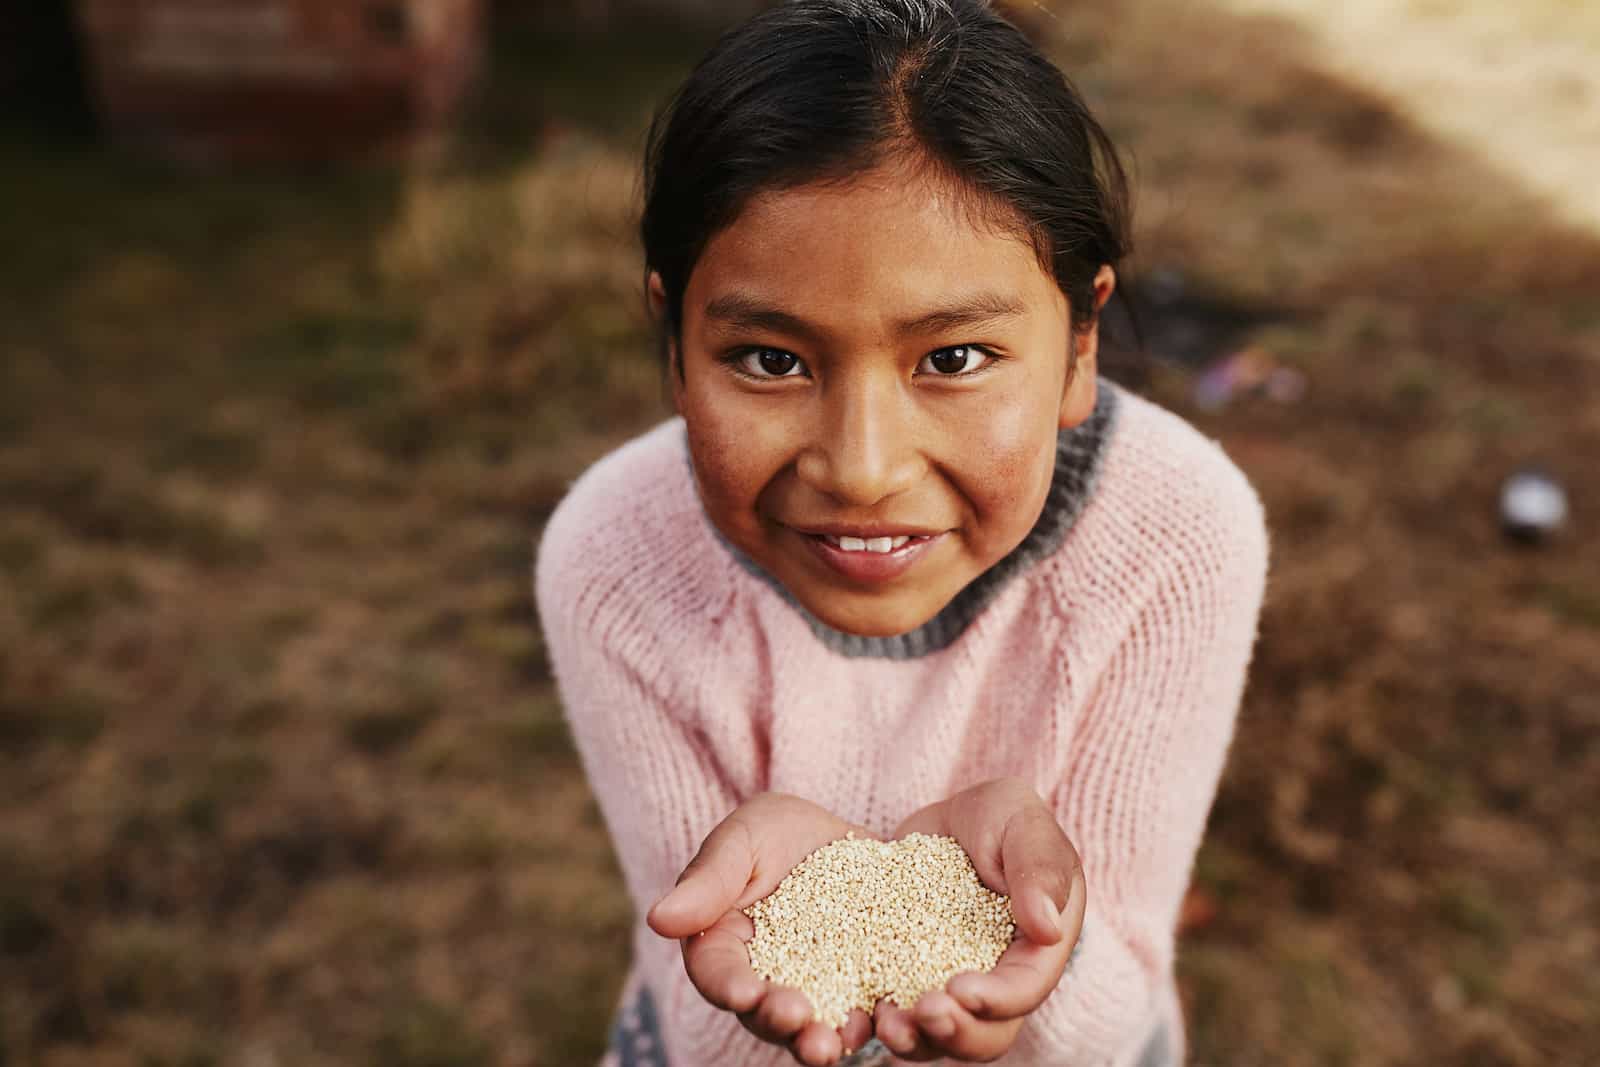 A girl in a pink sweater holds up a handful of seeds.